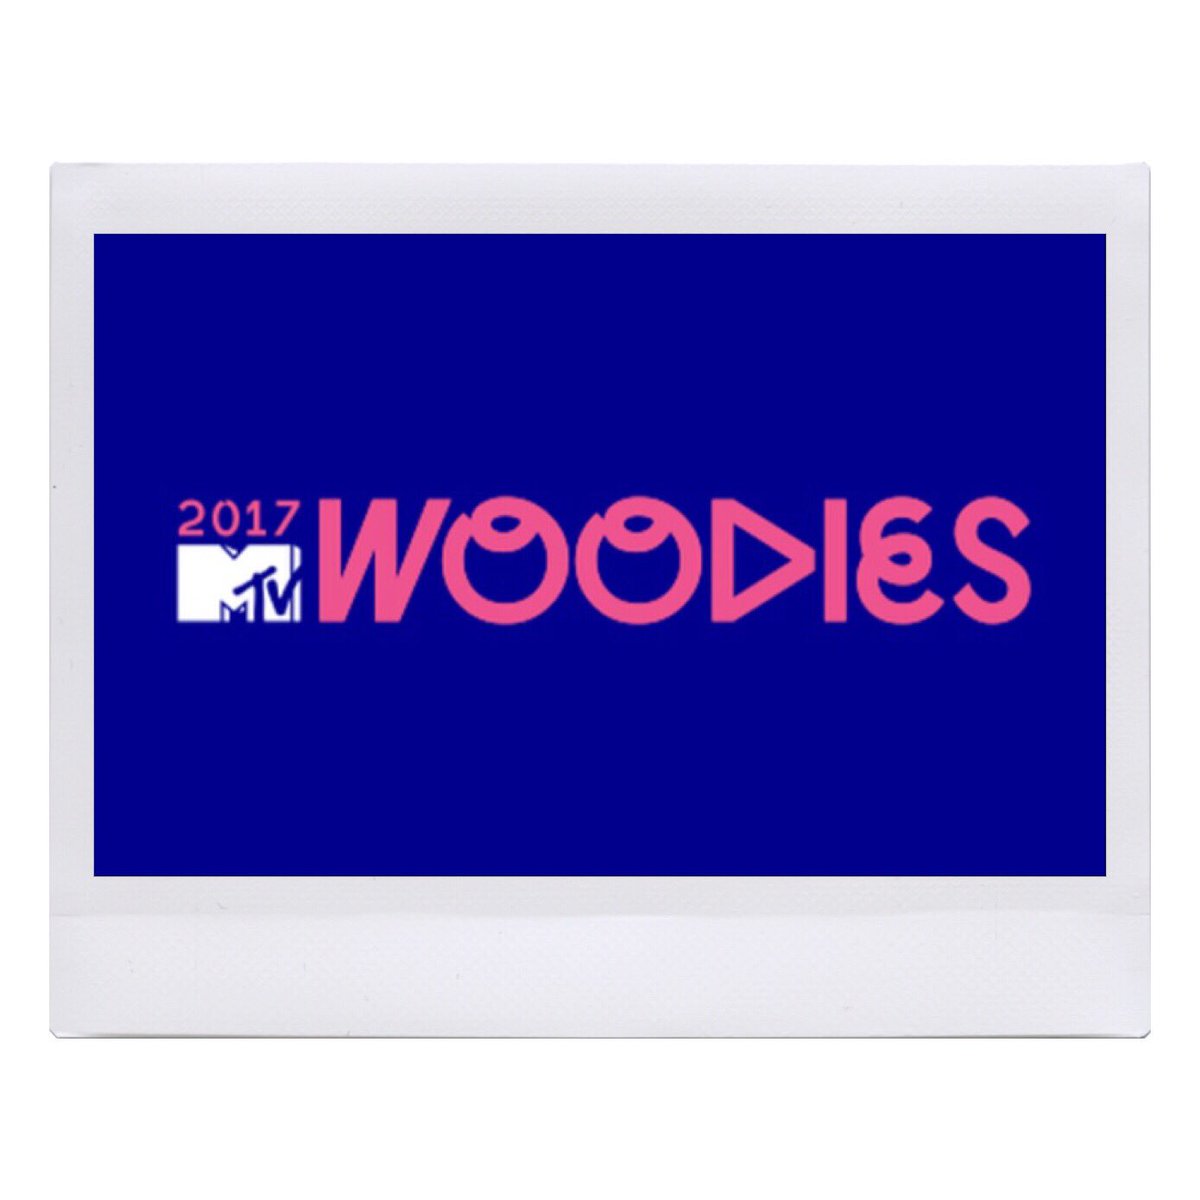 Be sure to tune into our Instagram story tonight to catch our girls @deuxtwins live from the @mtv #Woodies #mtvwoodies #skamlife